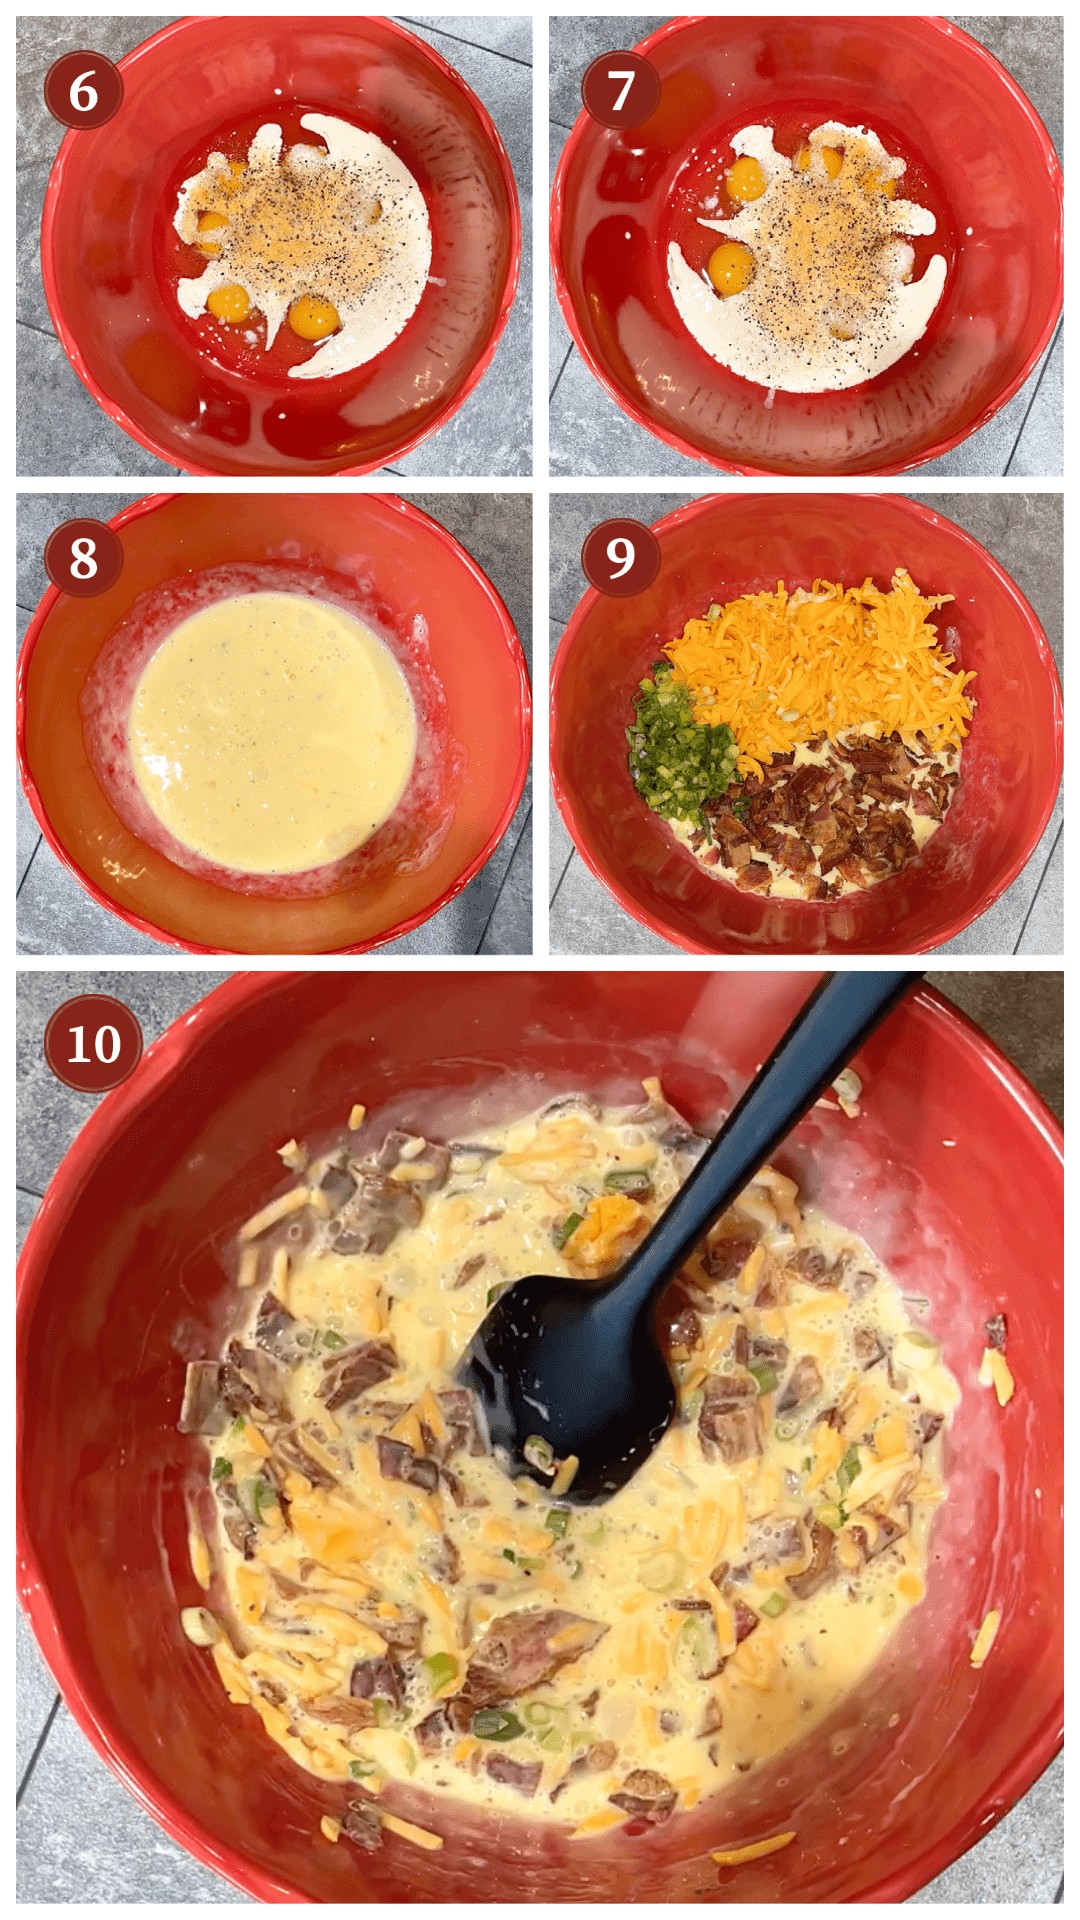 A collage of images showing the process of making hash brown casserole, steps 6 - 10.